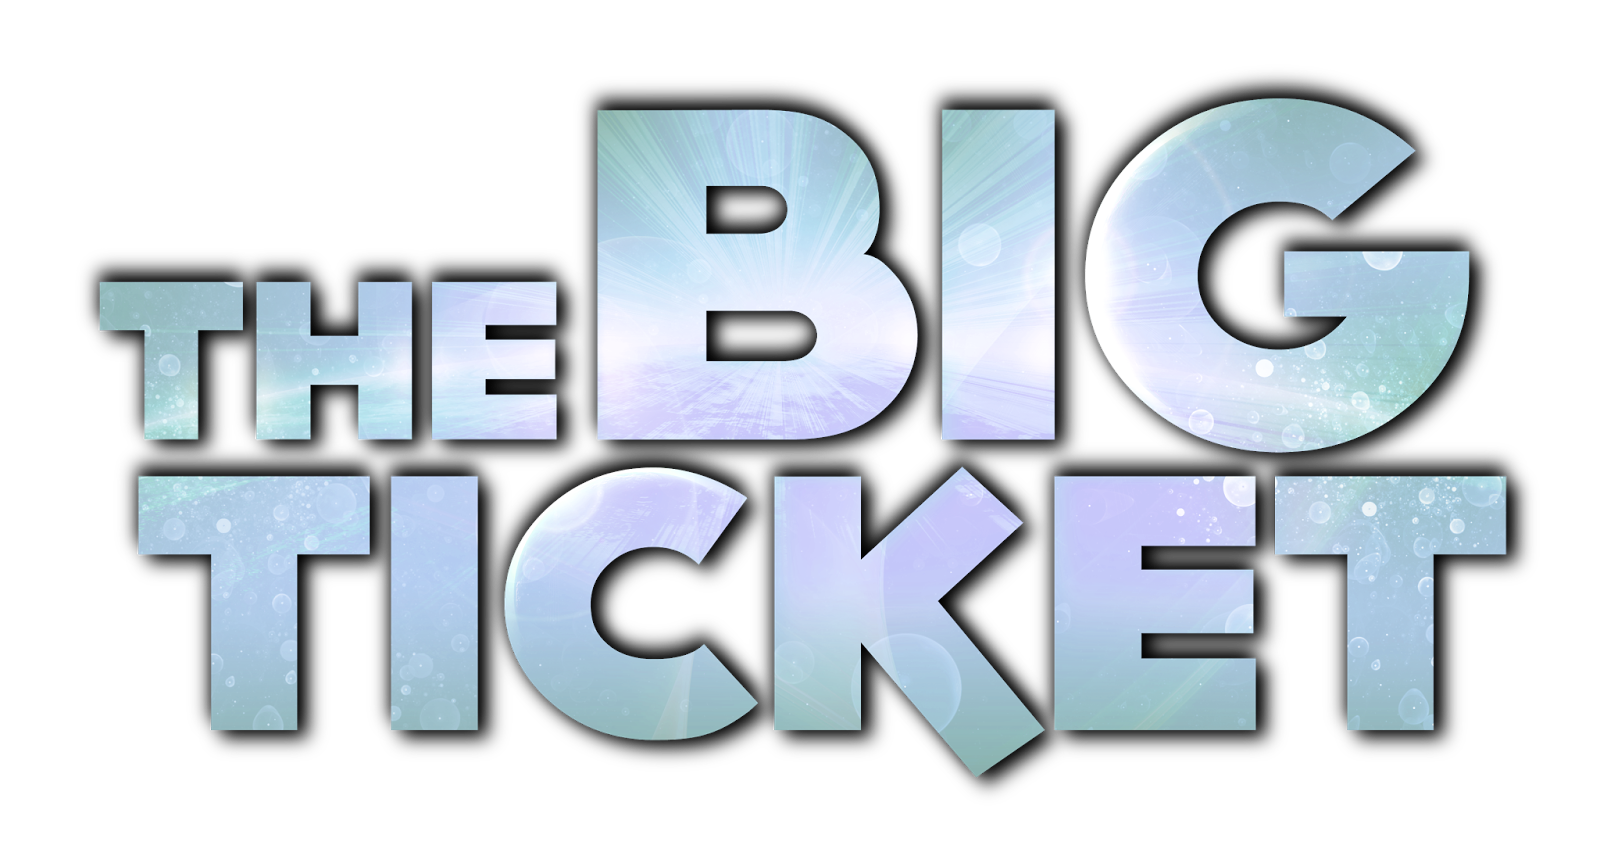 THE BIG TICKET FEATURING TWENTY ONE PILOTS, OF MONSTERS AND MEN, WALK